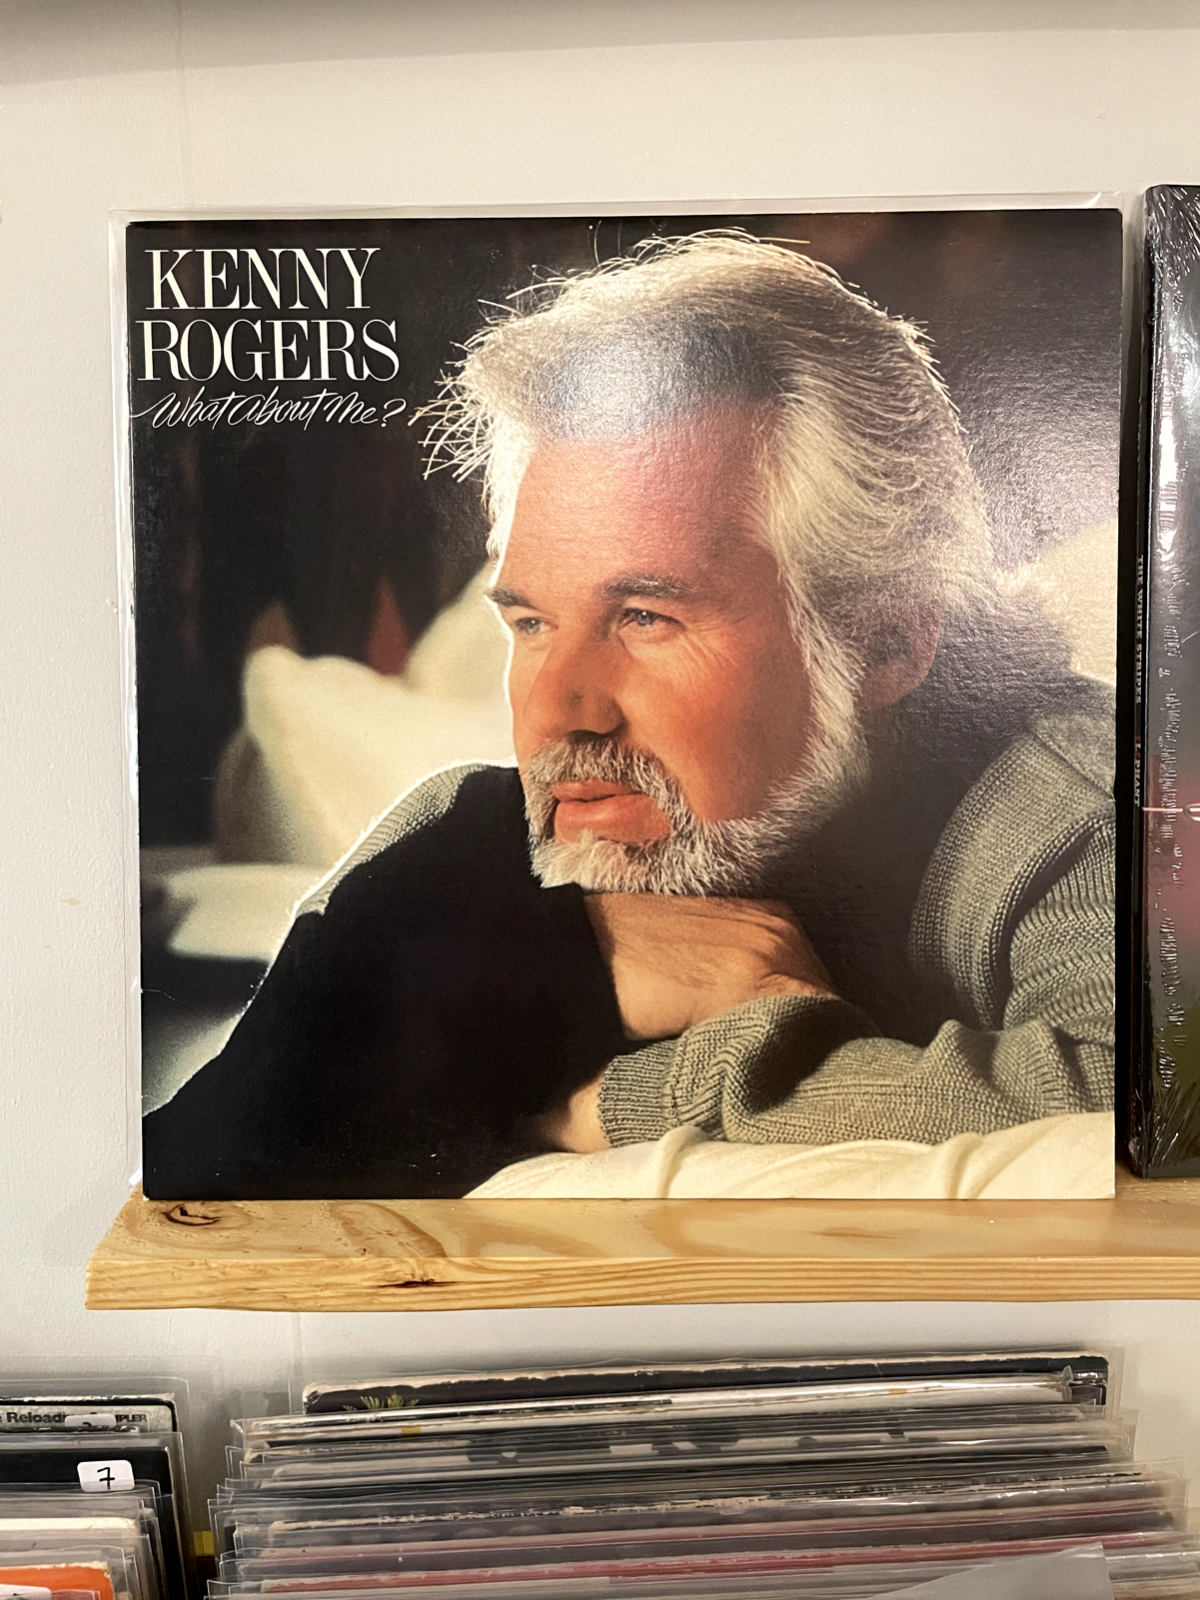 What About Me? [LP] by Kenny Rogers (Vinyl, RCA Records, 1984)